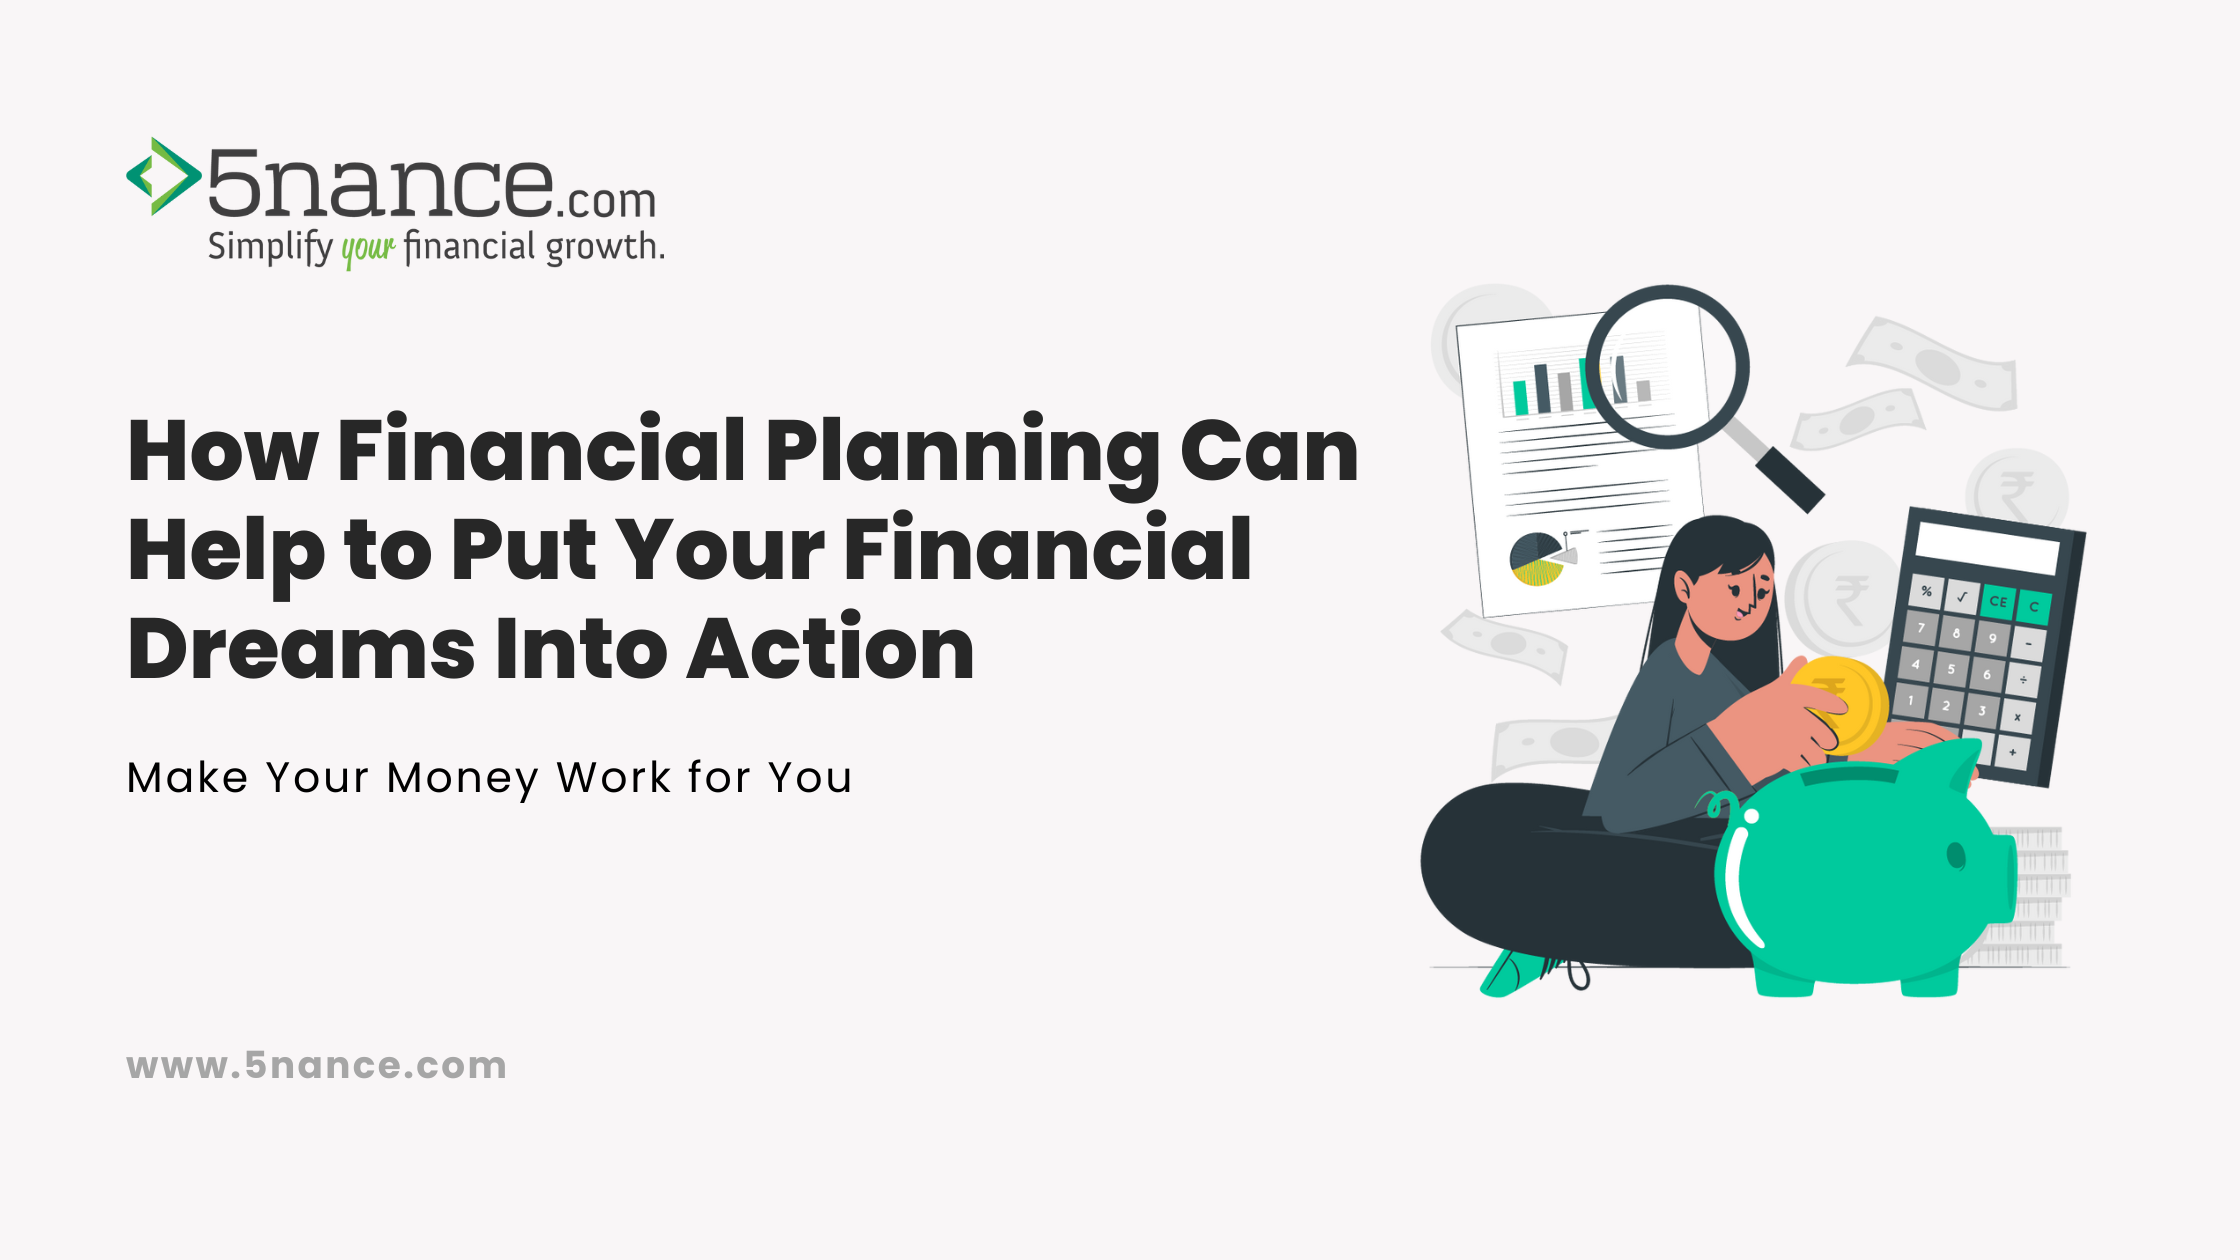 how financial goal planning can help achieve your dreams